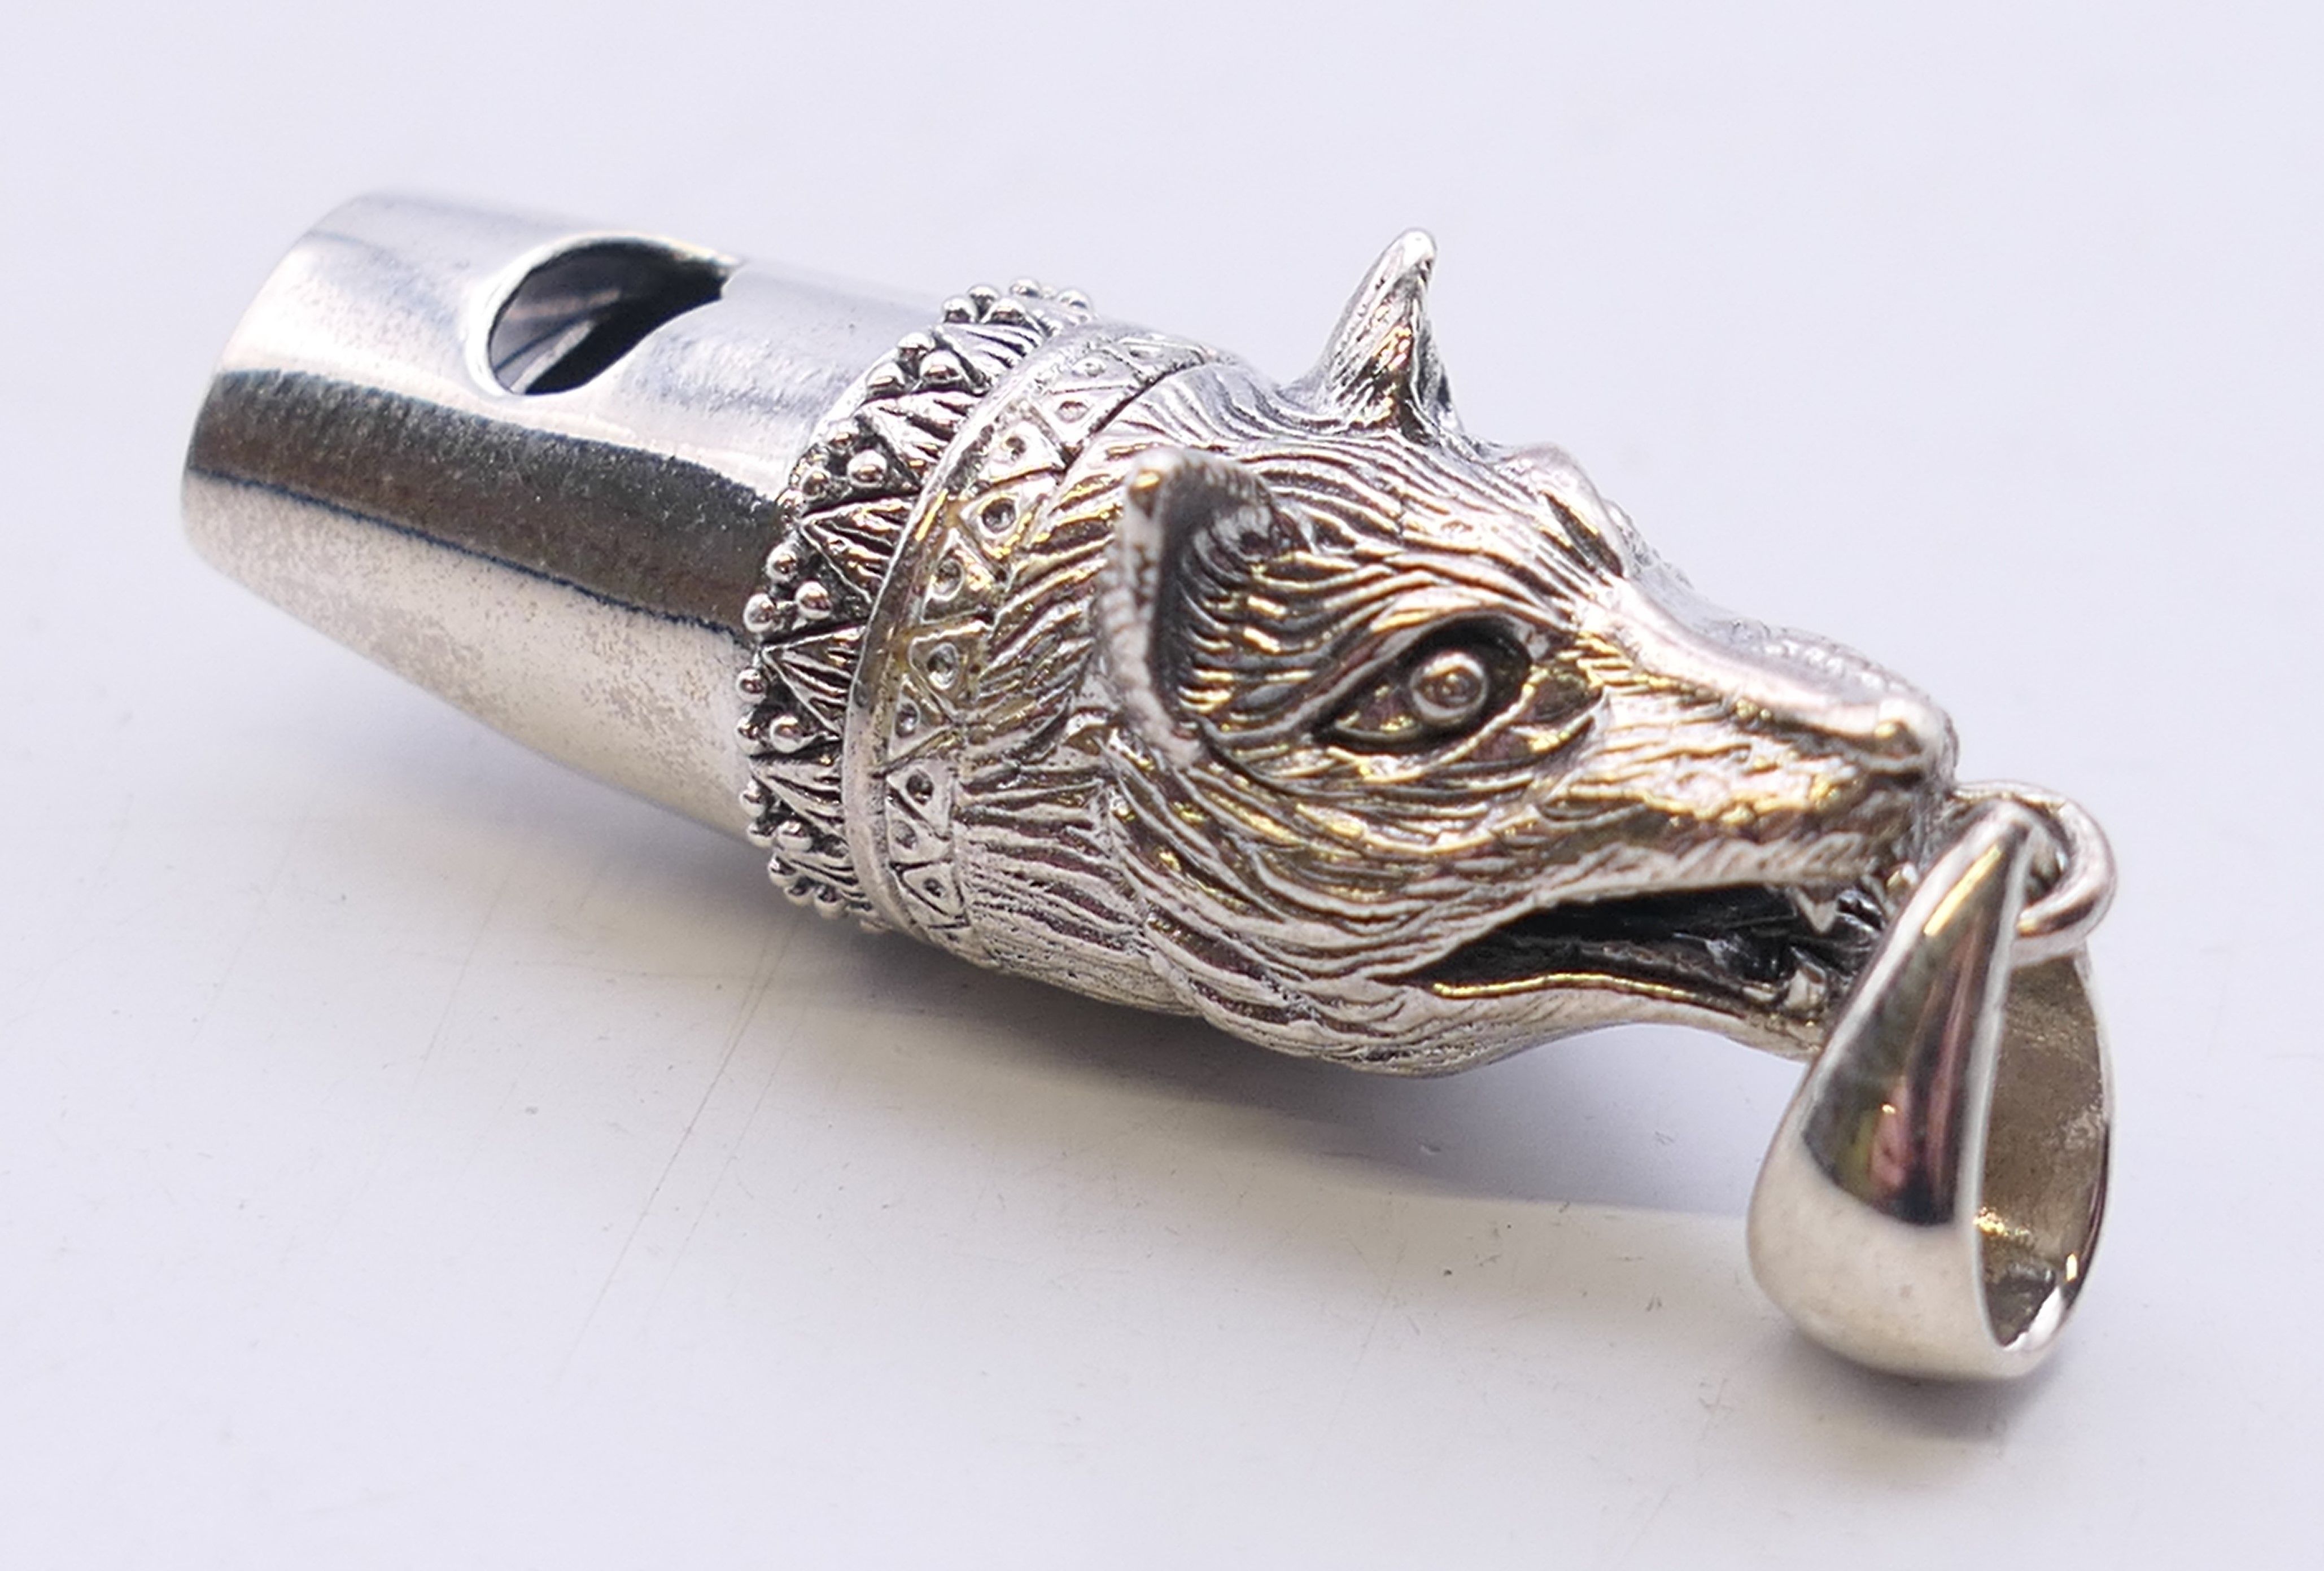 A silver fox mask whistle. 4.5 cm long overall.